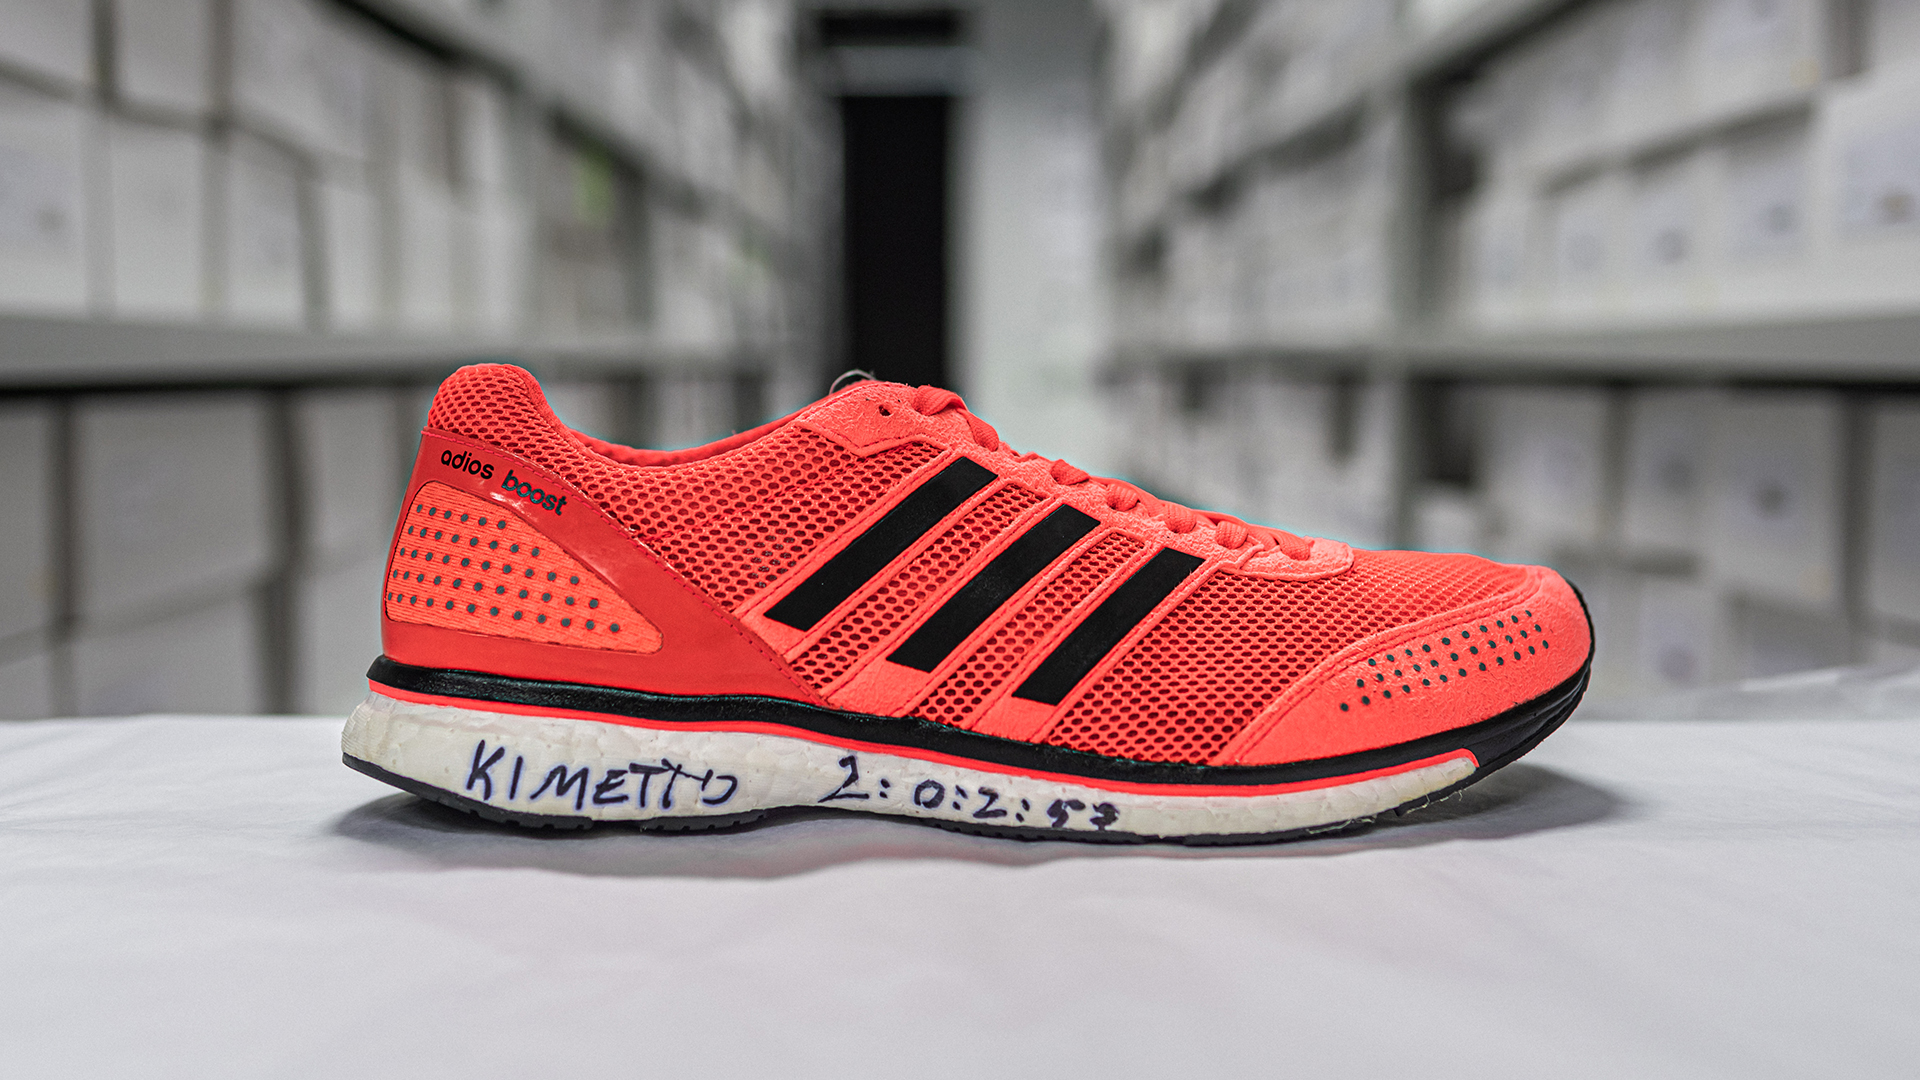 adidas Running on Twitter: "With the adizero adios Boost 2.0 on his feet, Dennis Kipruto Kimetto changed fast forever at the 2014 Berlin Marathon. Crossing the finish line in a world